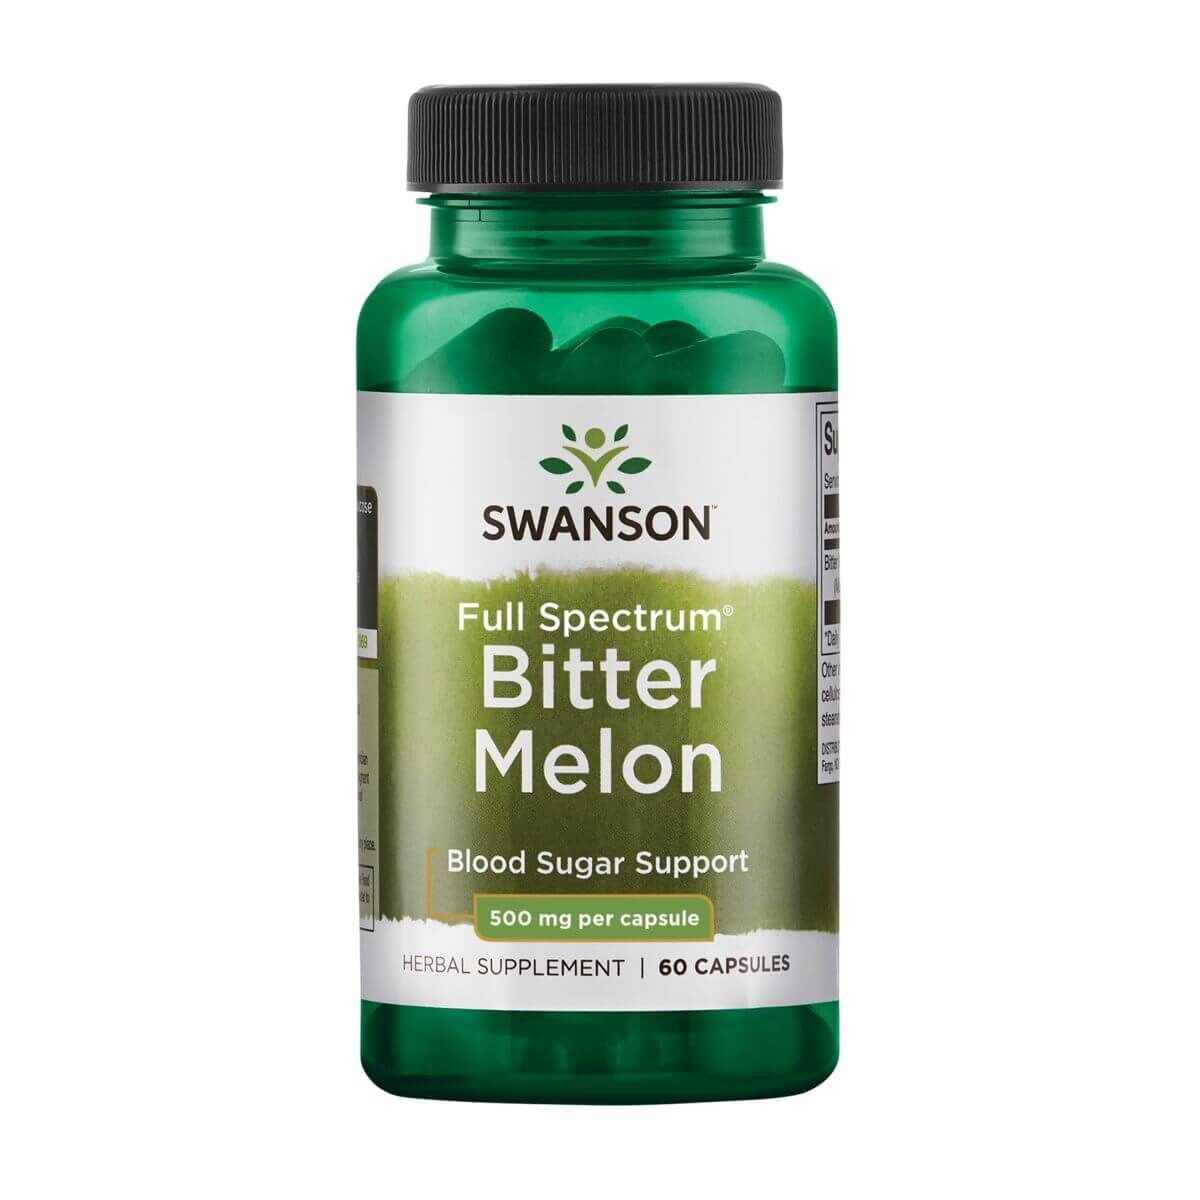 Swanson Bitter Melon 500 mg 60 Capsules - Health and Wellbeing at MySupplementShop by Swanson